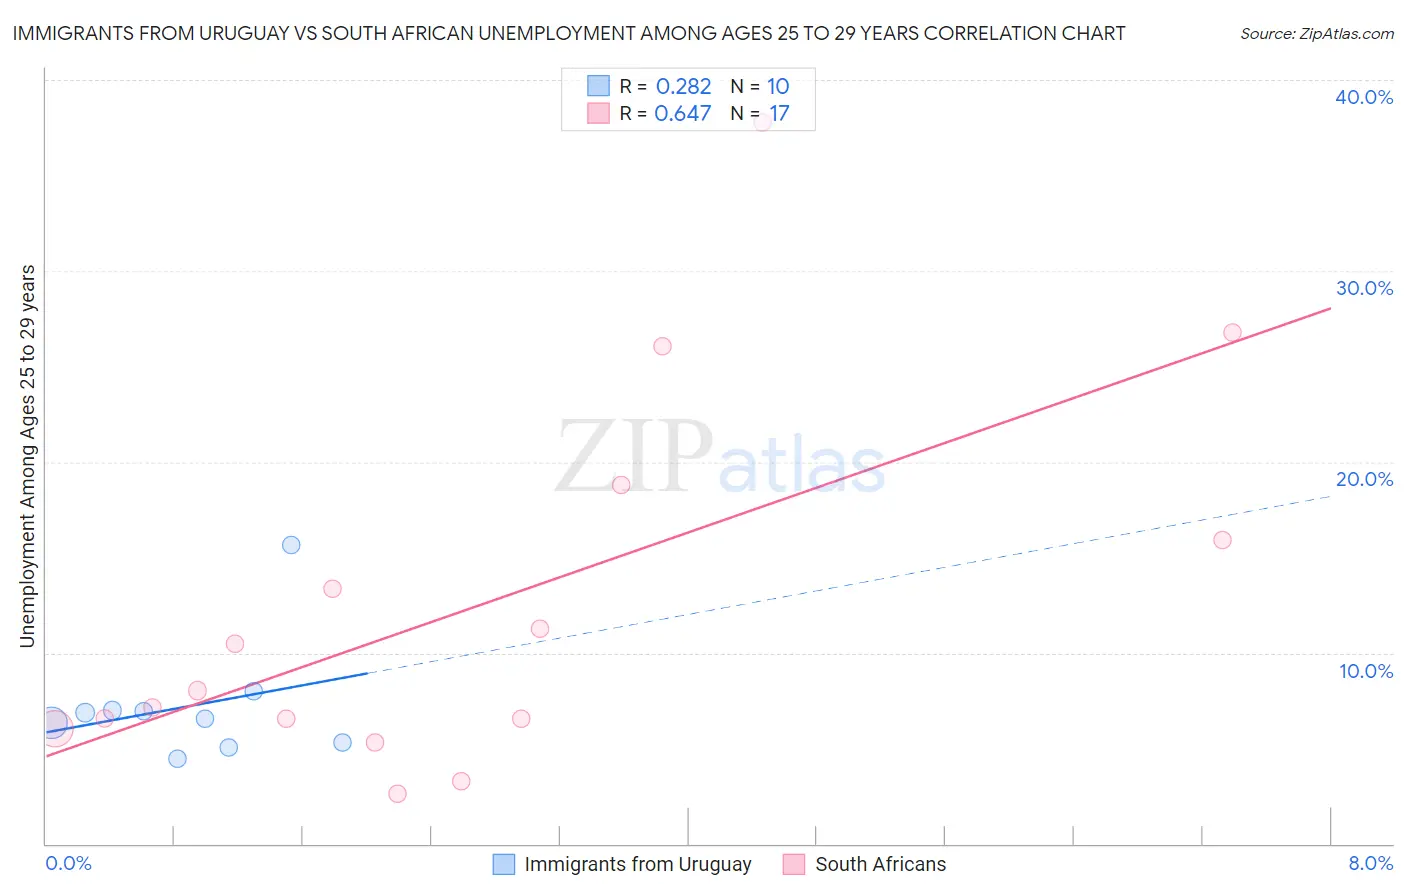 Immigrants from Uruguay vs South African Unemployment Among Ages 25 to 29 years